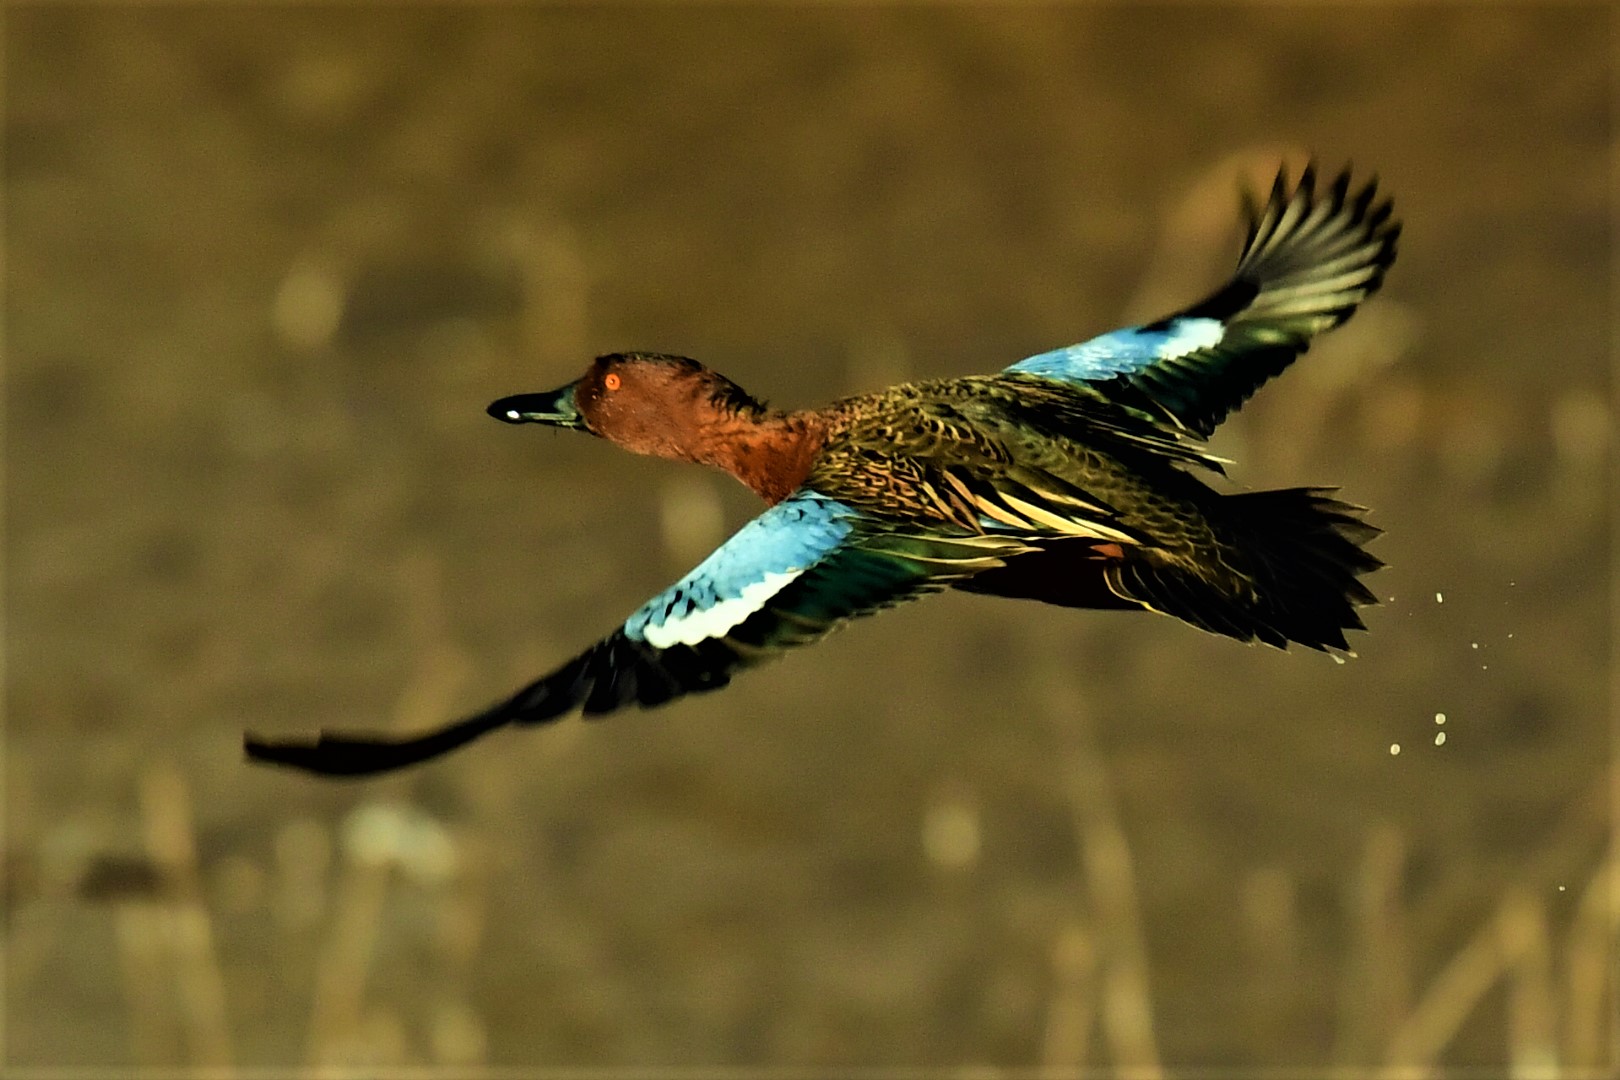 Photo by Jerry Bromiel  |  Duck taking flight at Whitewater Draw, Cochise County, AZ

Title:  'Droplets'